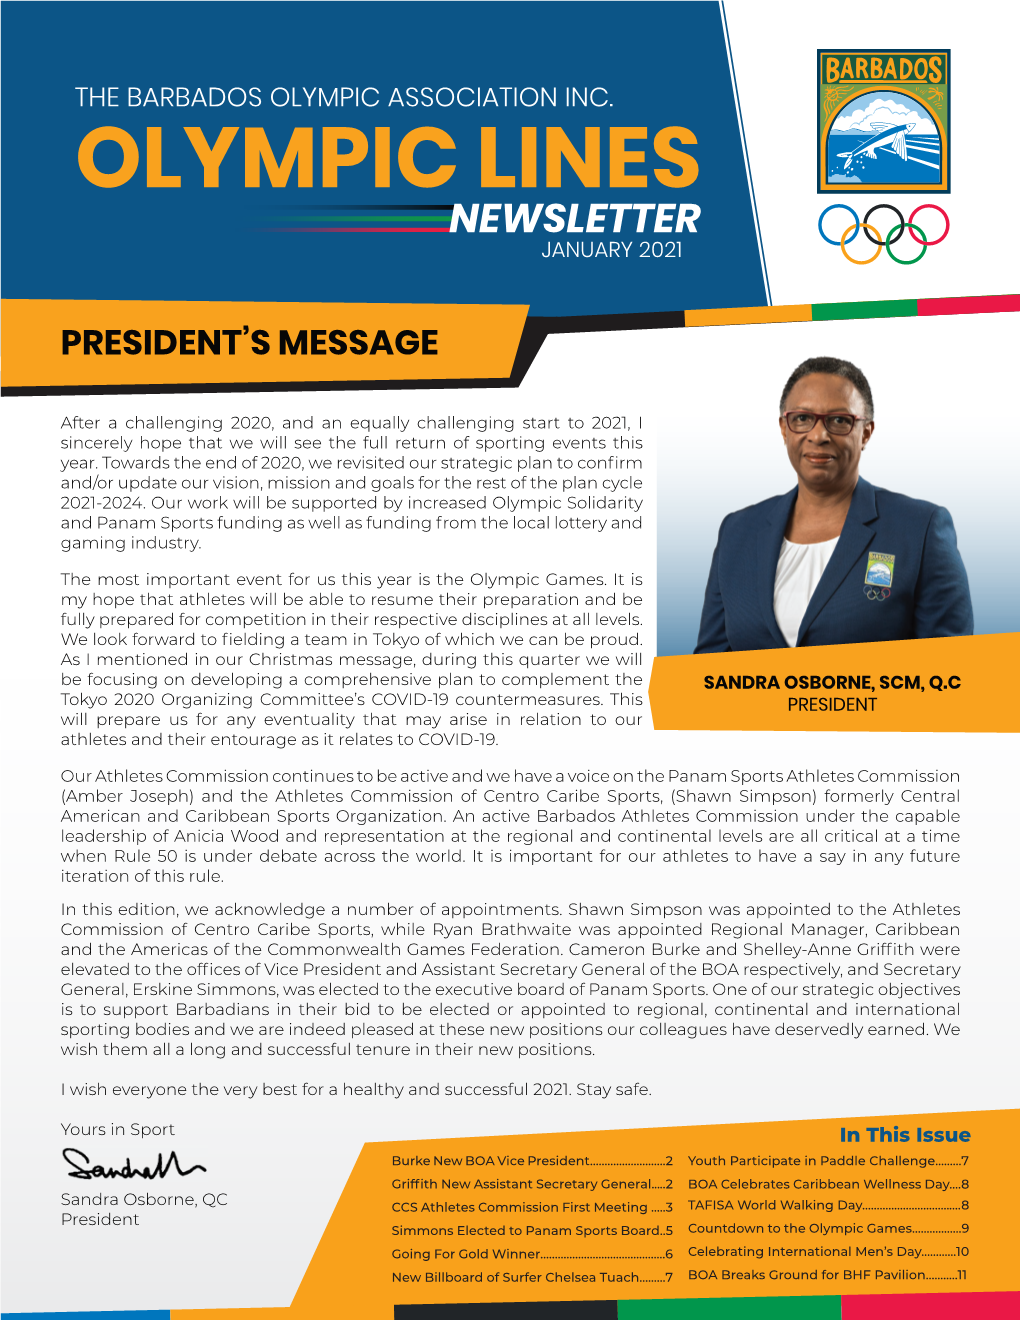 OLYMPIC LINES Centro Caribe Sports Athletes Commission Holds First Meeting – Shawn Simpson